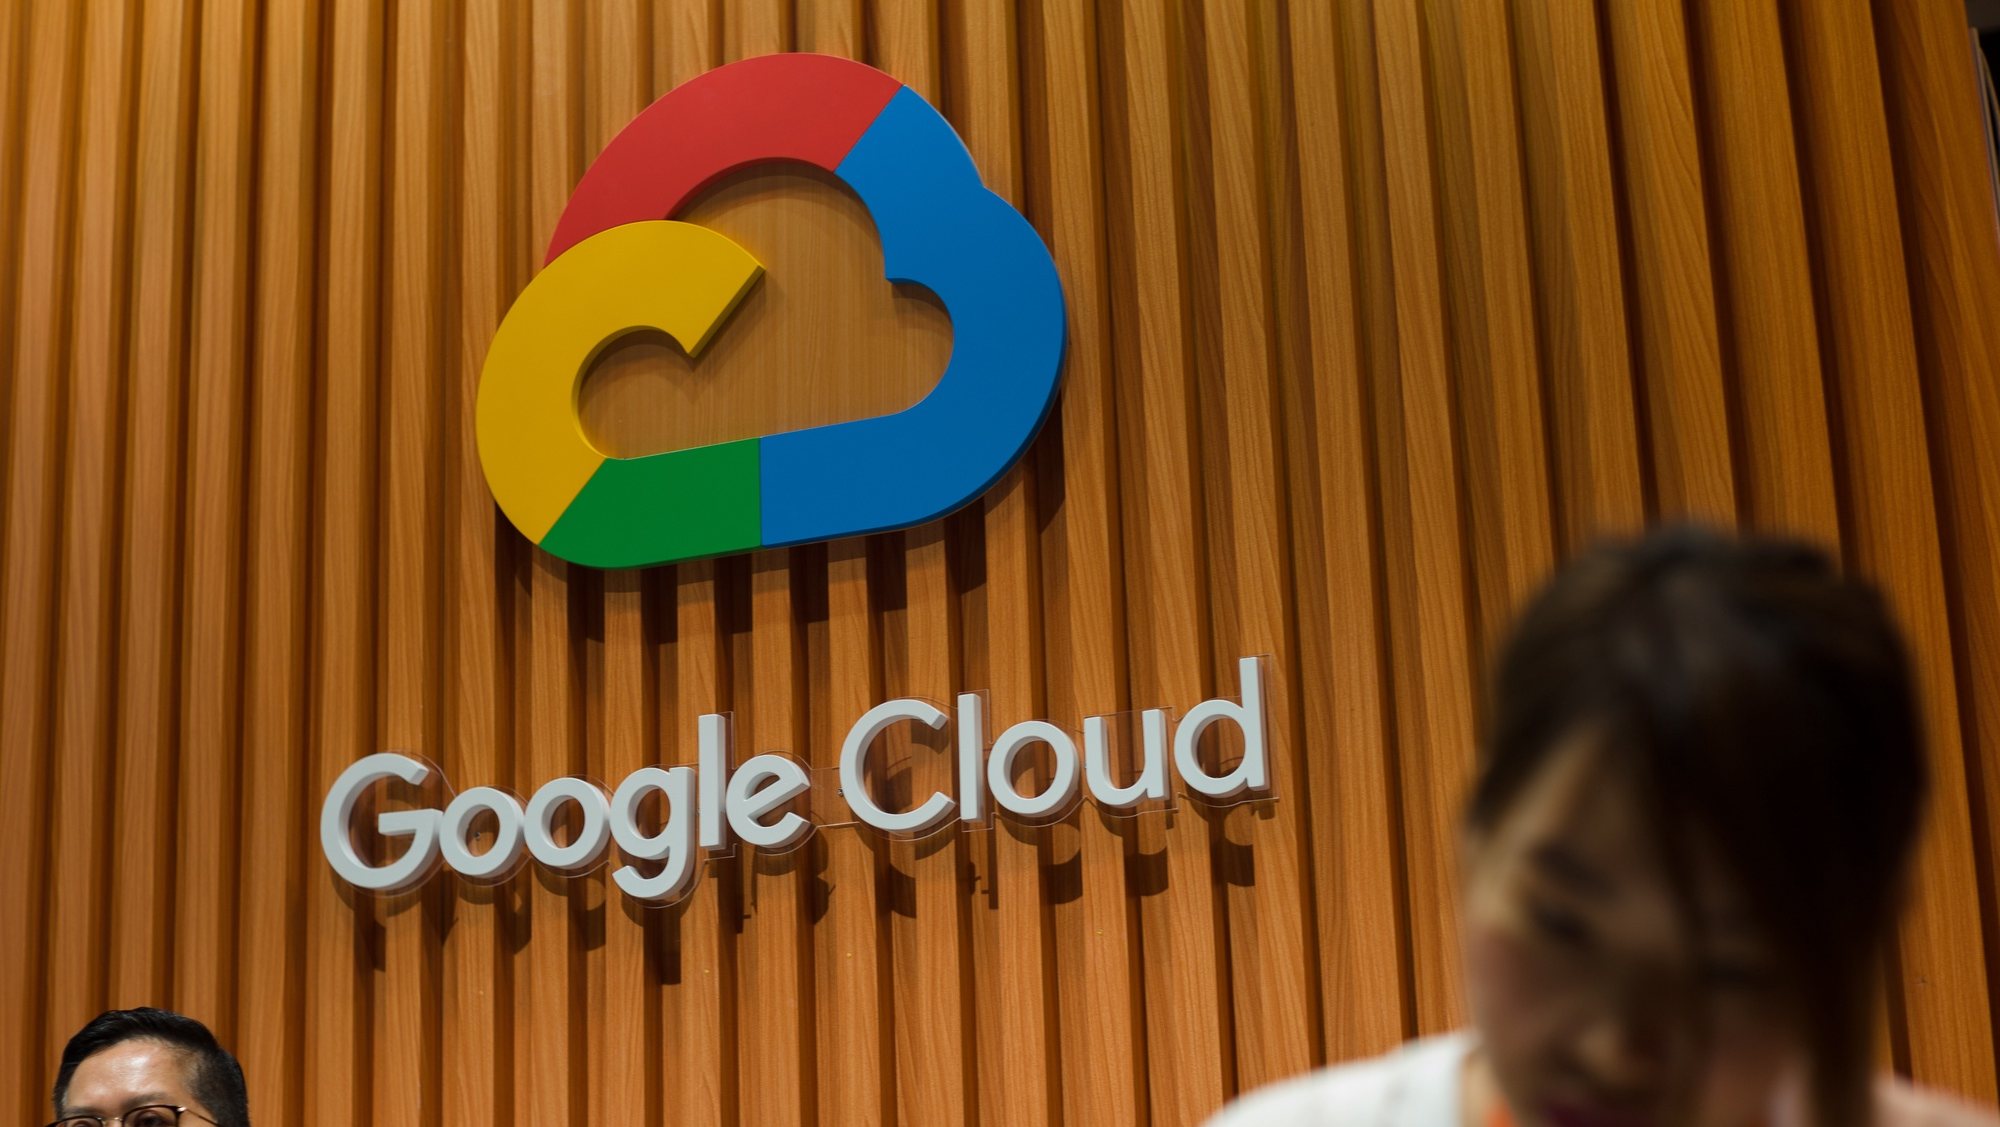 epa07590799 The Google Cloud logo is displayed at Google Inc. booth during the Cloud Expo Asia 2019 in Hong Kong, China, 22 May 2019. The expo runs through 23 May.  EPA/JEROME FAVRE